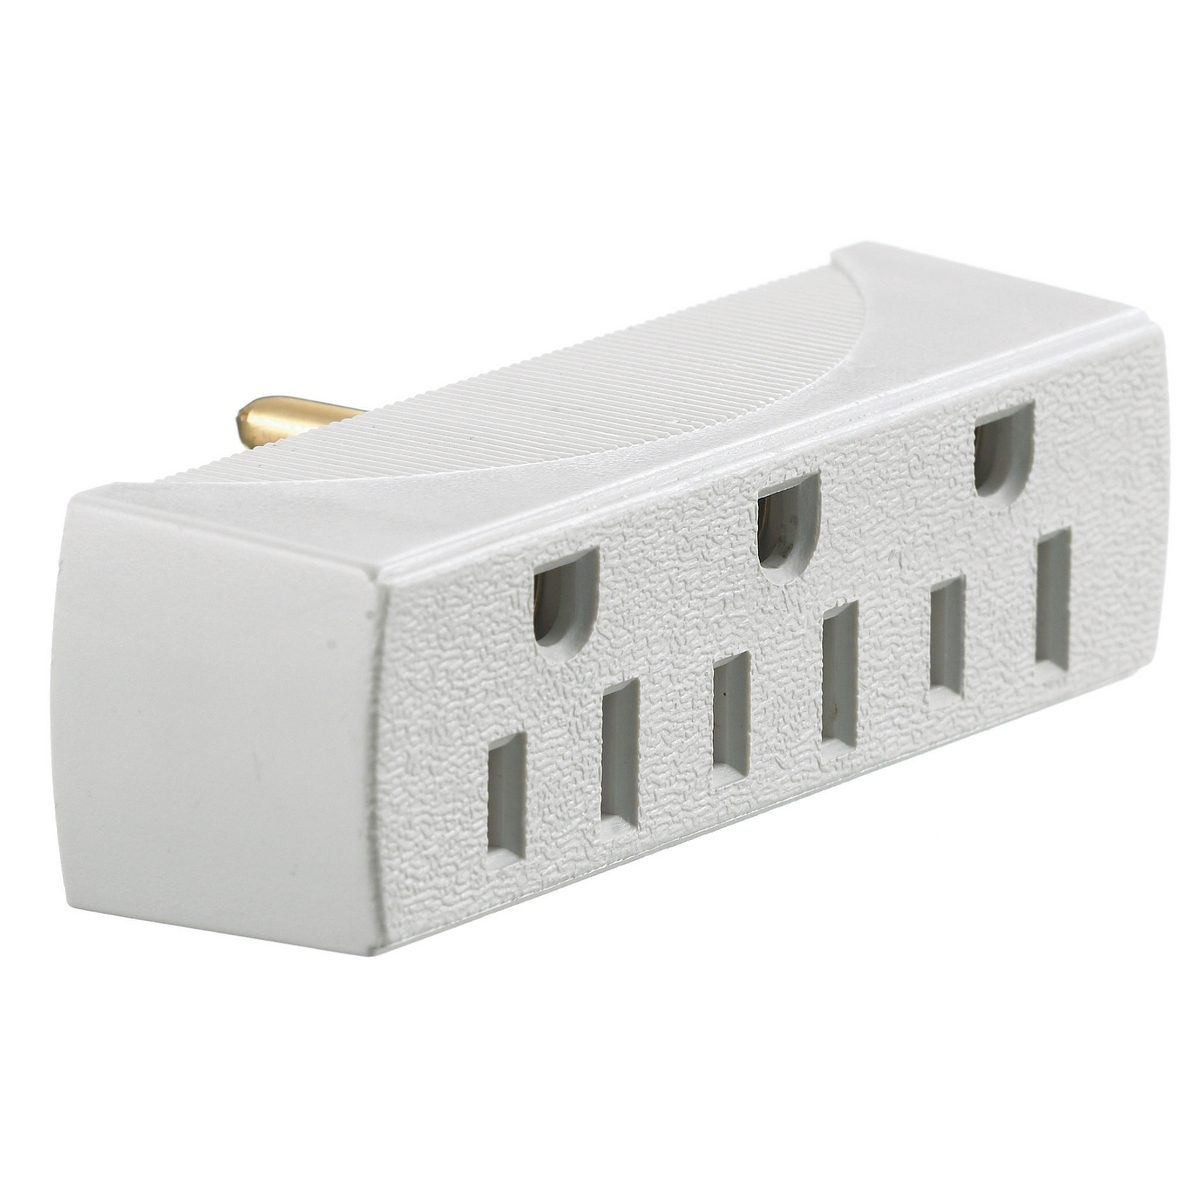 TAP, SINGLE TO 3 OUTLET, 15A 125V, WHITE